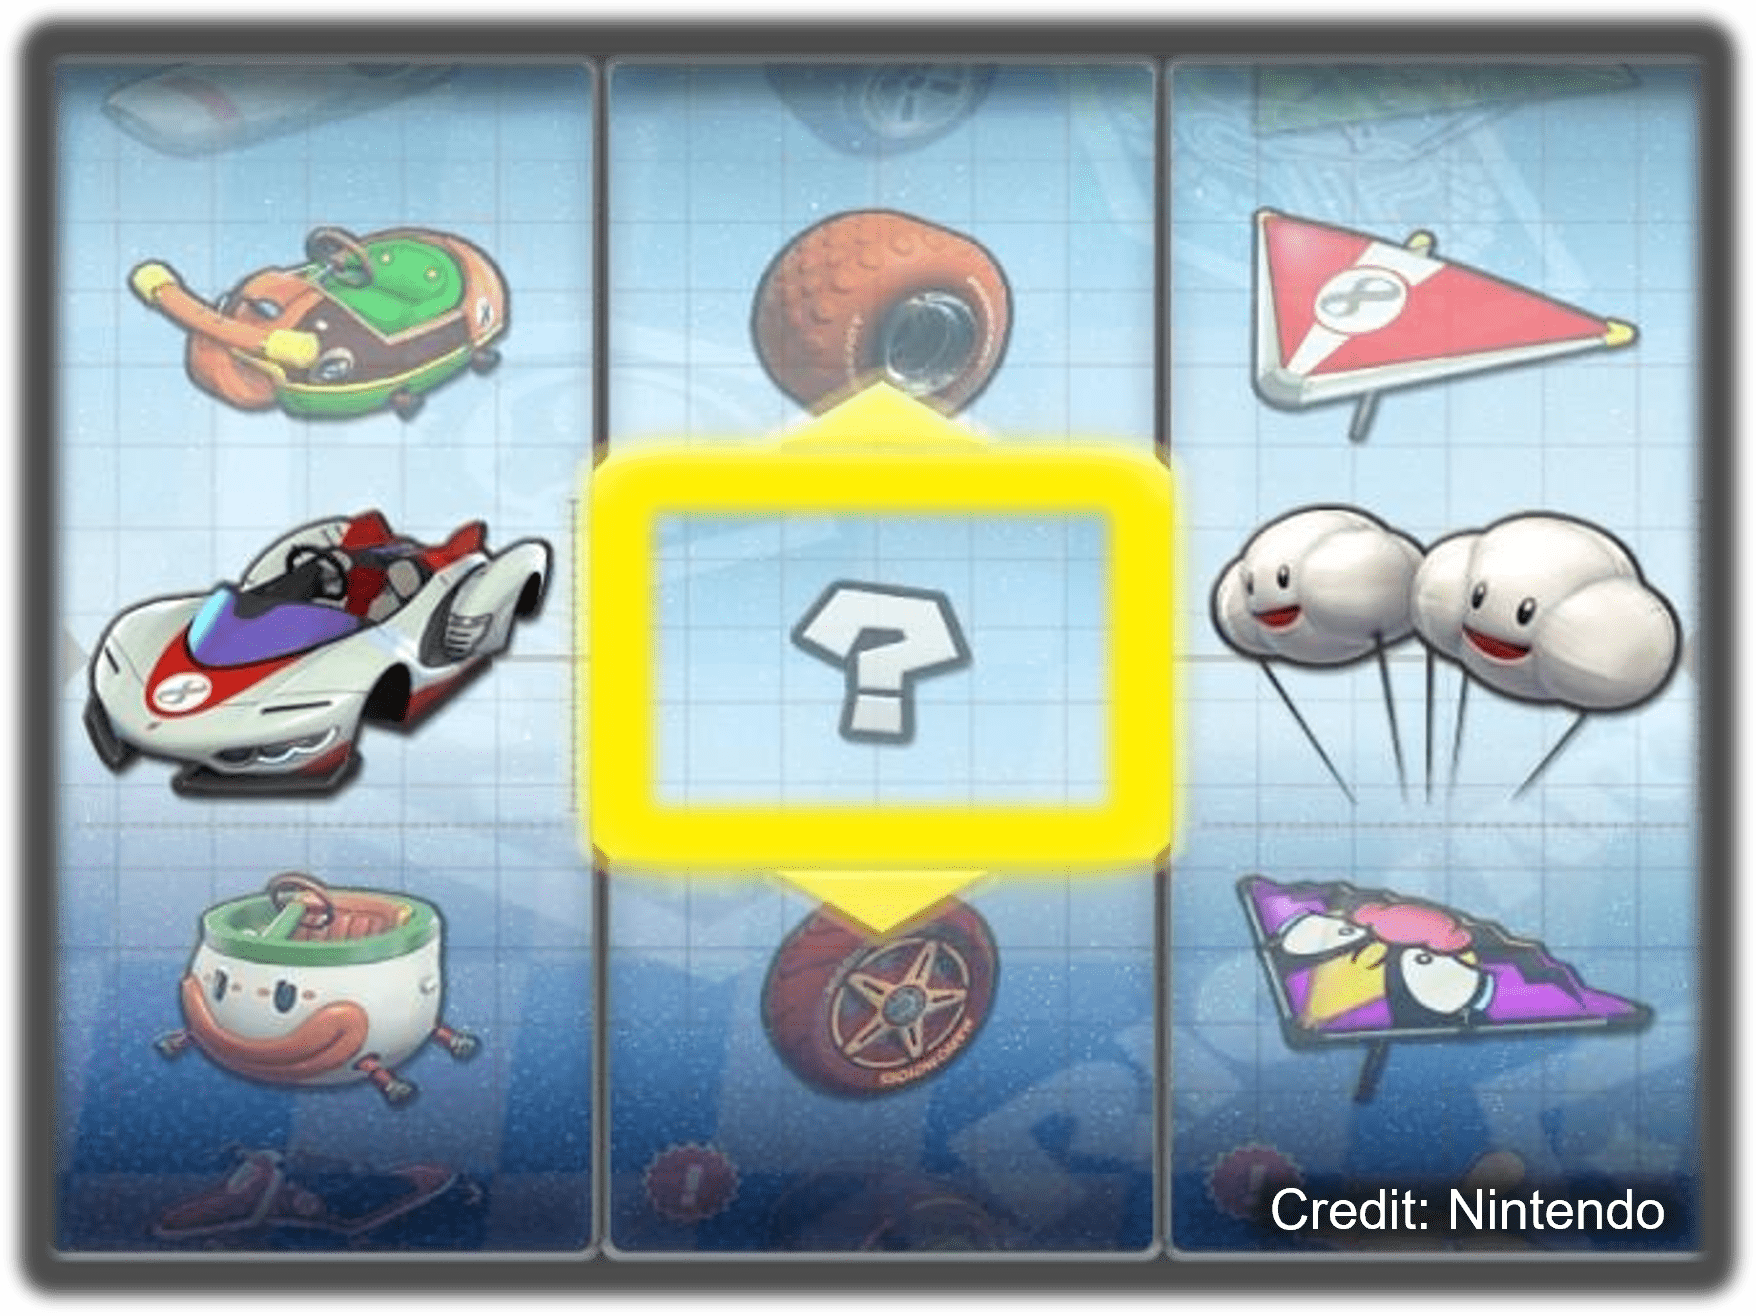 Nintendo Mario Kart cart selection screen with question mark highlighted in middle to suggest you could be next important part of the lab.